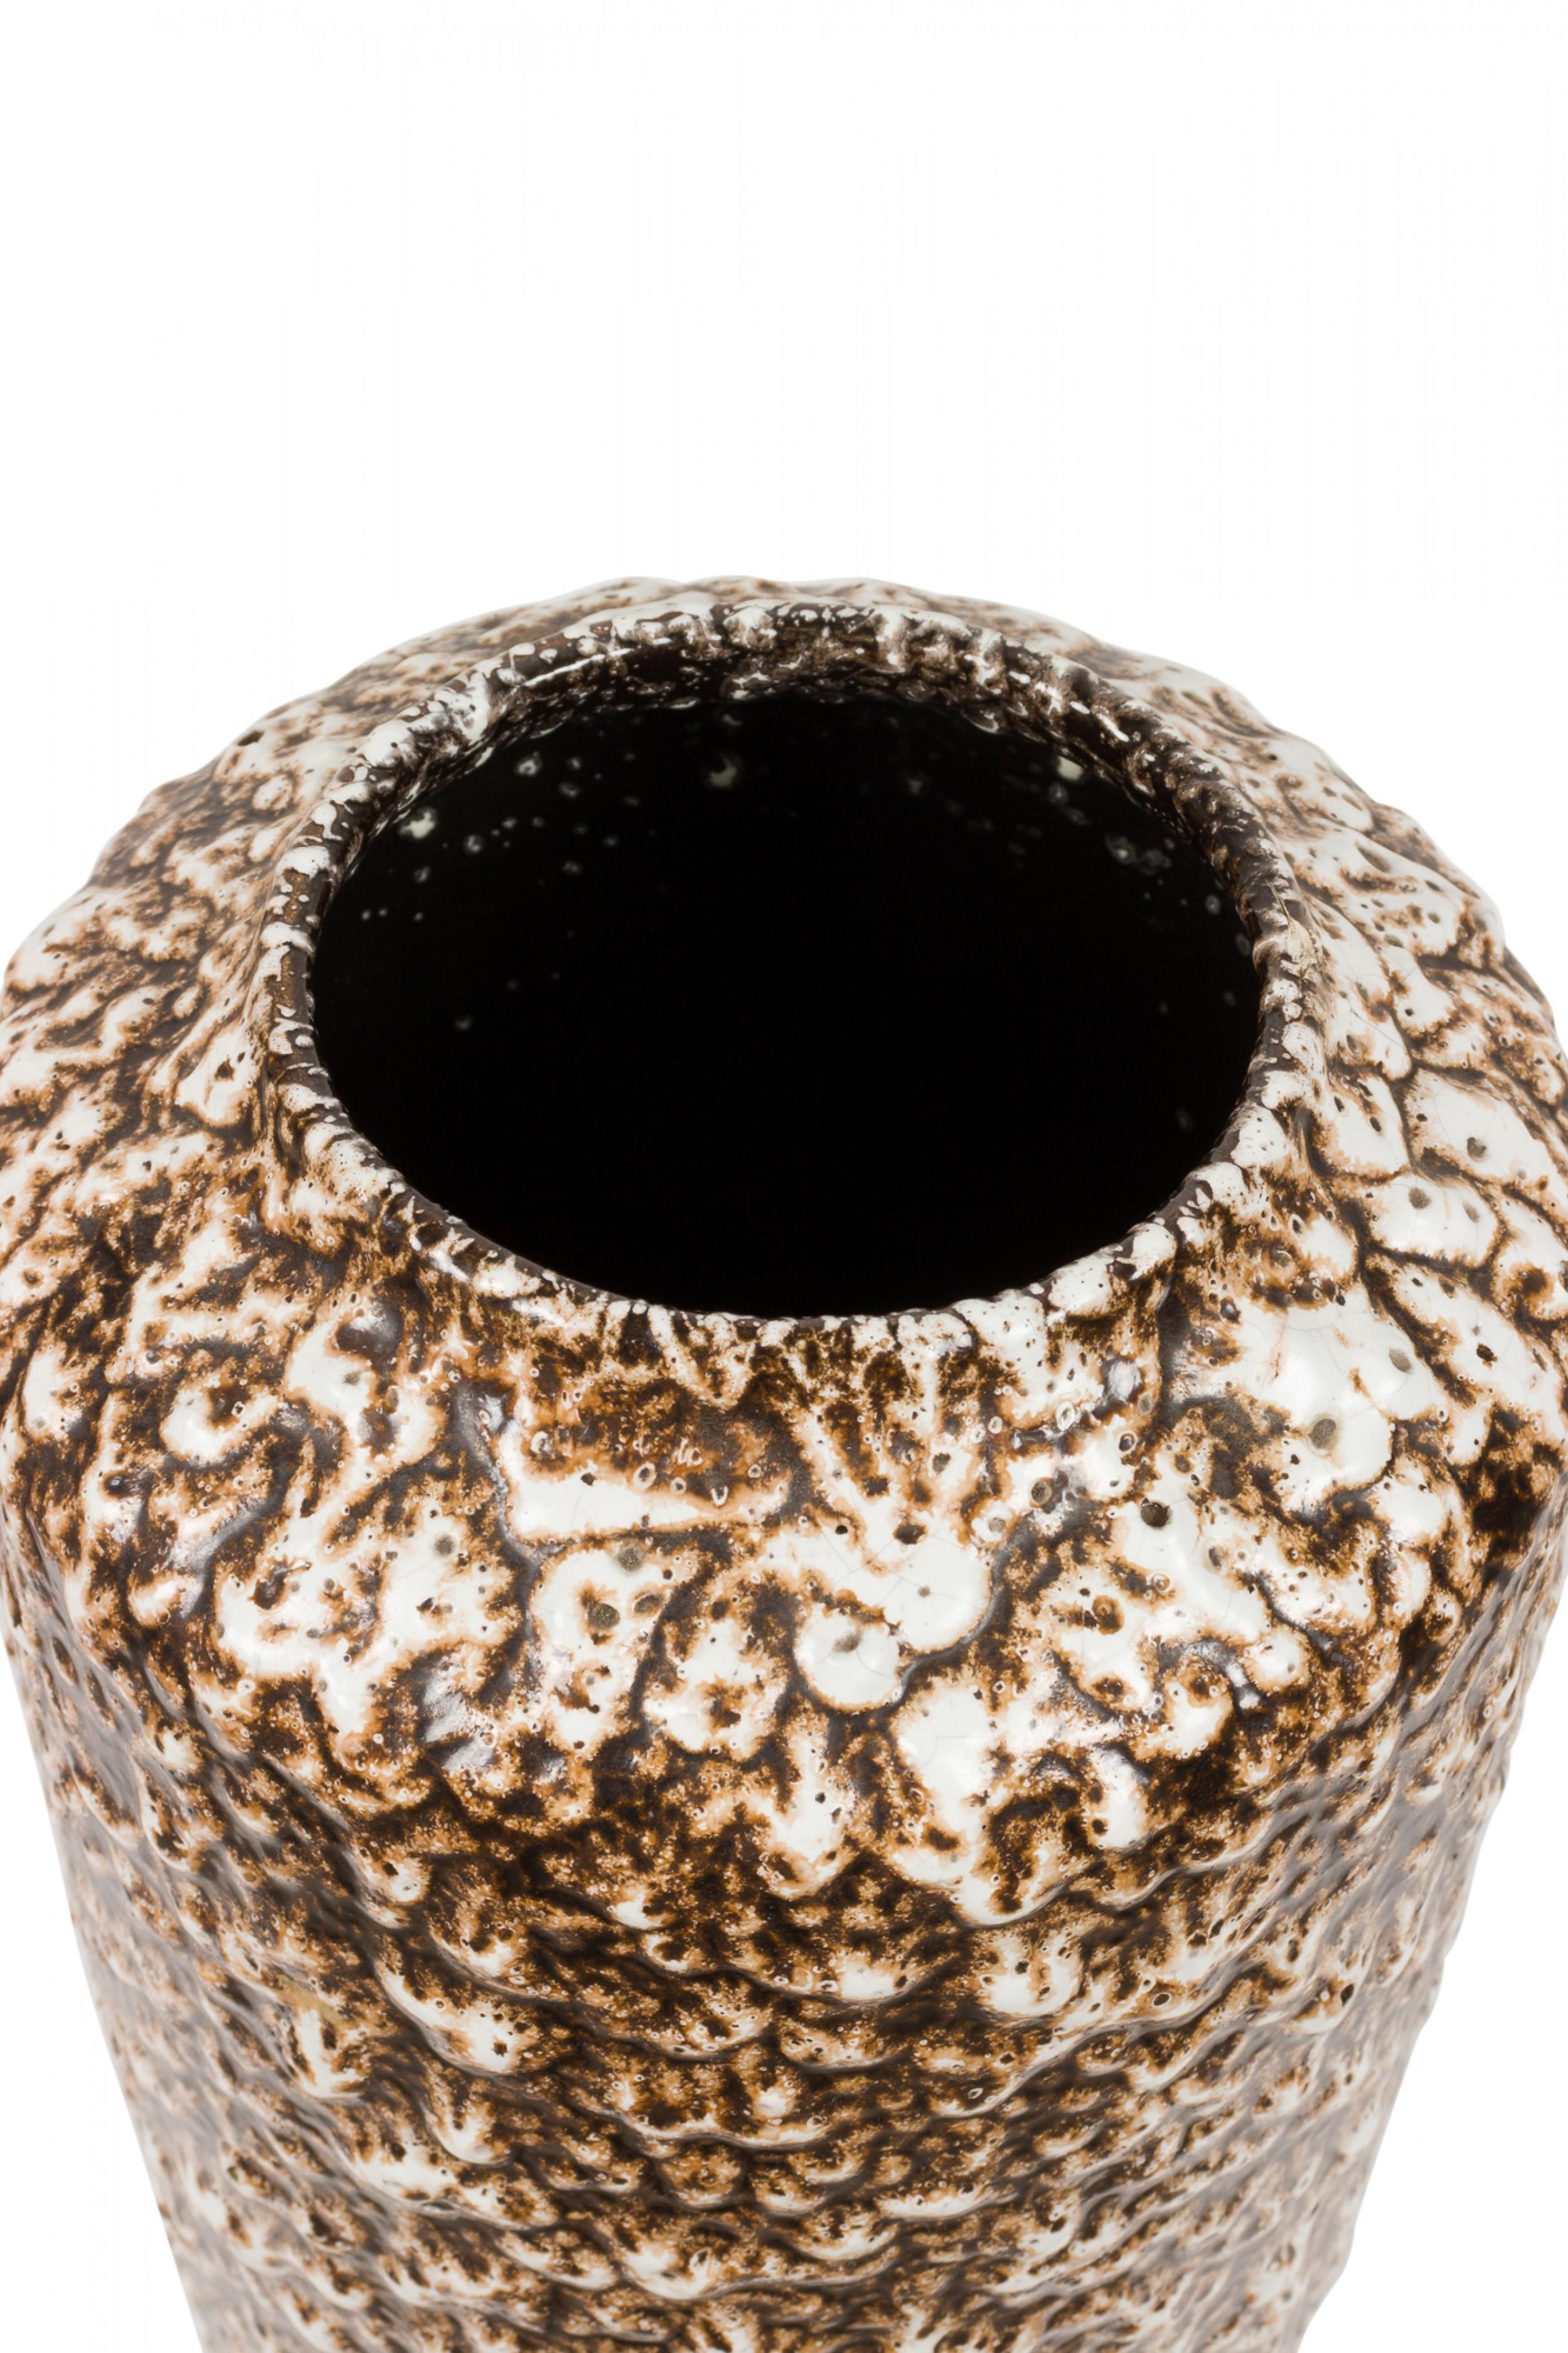 West German Mid-Century cylindrical-form ceramic vase with a pitted and bubbled fat lava glaze in beige and deep brown. (mark on bottom, W. GERMANY 517-38).